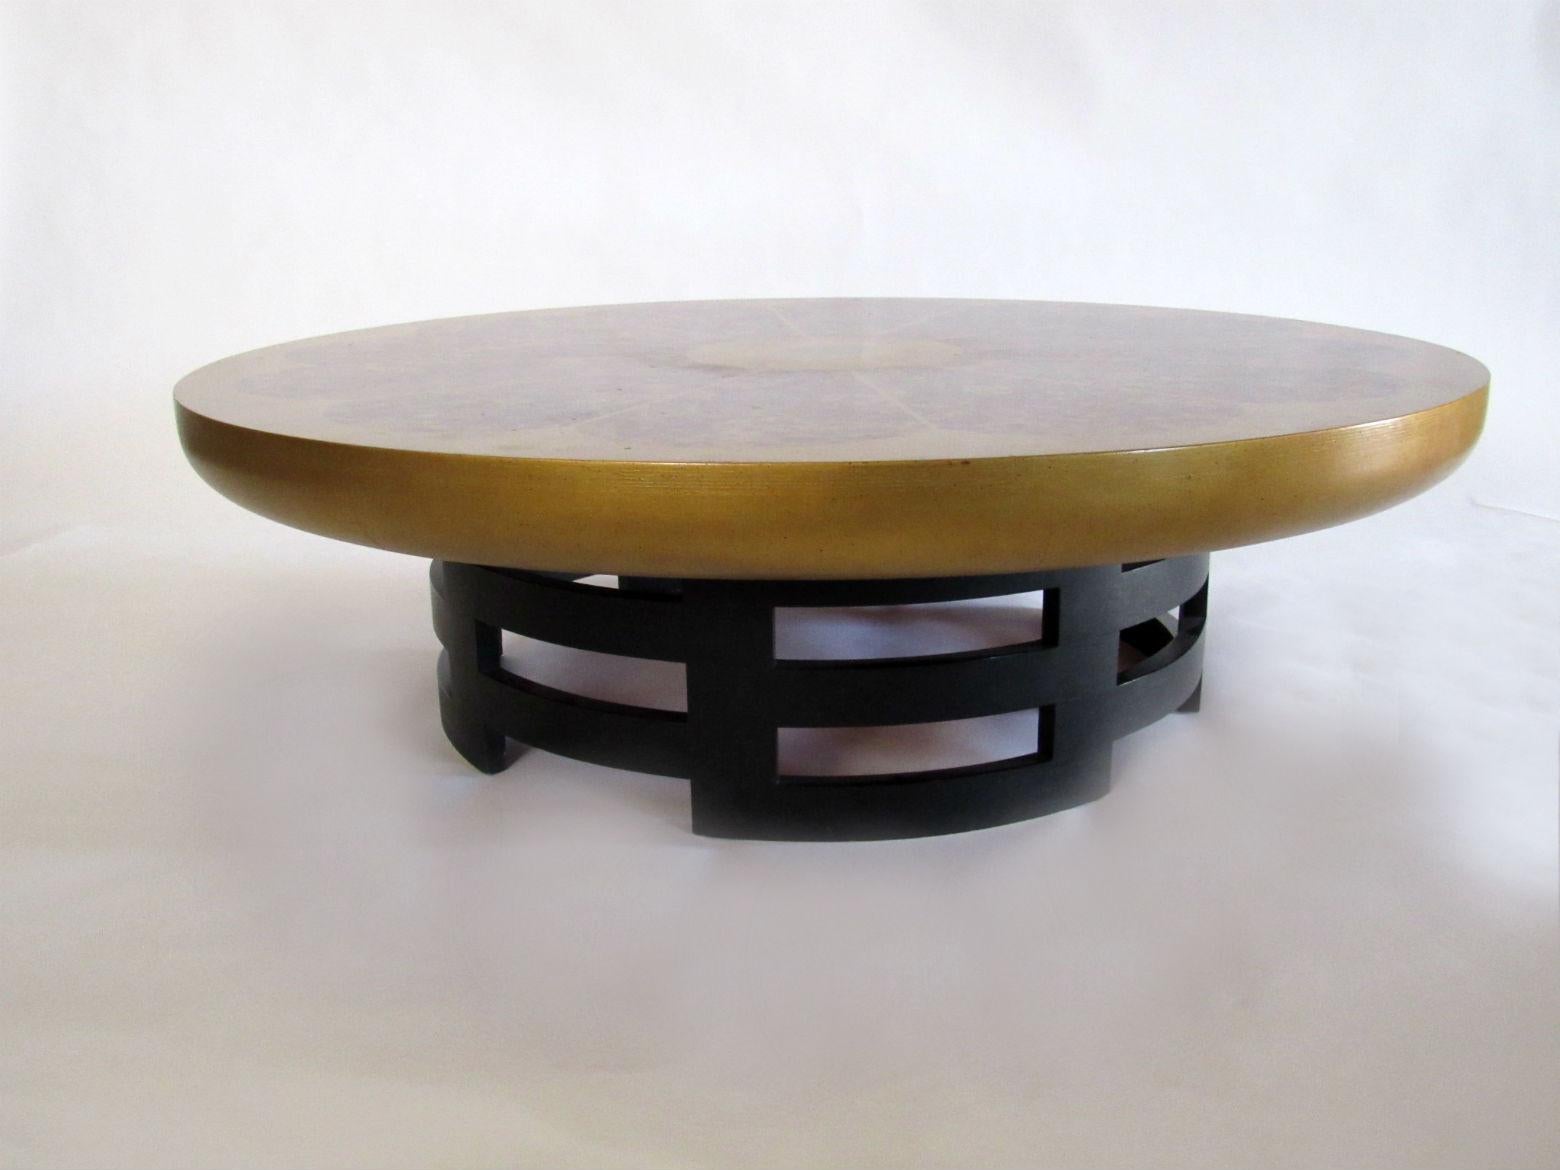 Lotus coffee table designed by Theodore Muller and Isabel Barringer for Kittinger in the 1950s. A large round gilt coffee table on an interlocking, geometric, ebonized-wood base.